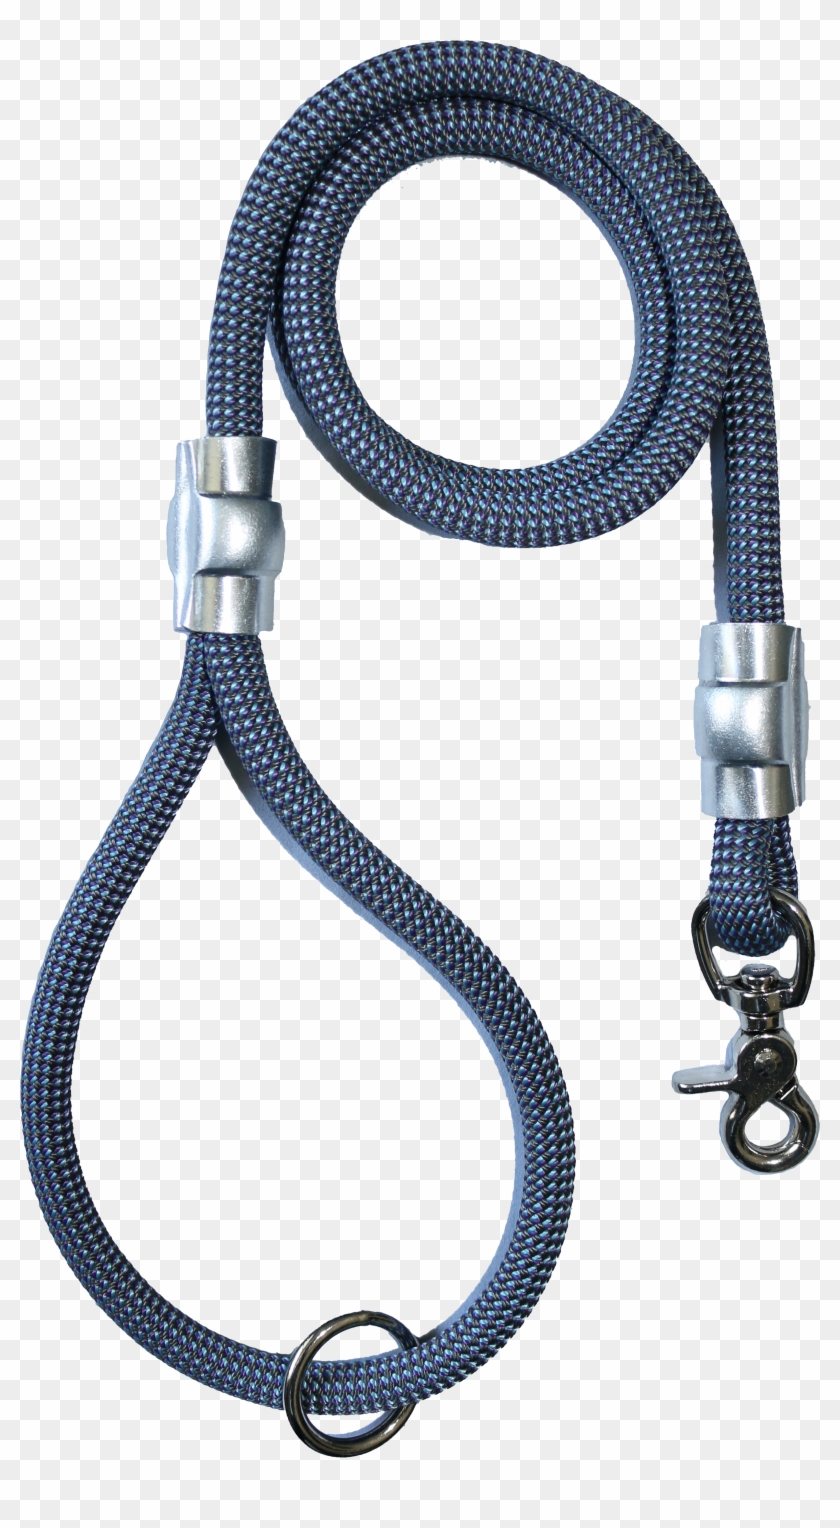 Professional Climbing Rope Dog Leads / Leashes, And - Skipping Rope Clipart #3024765